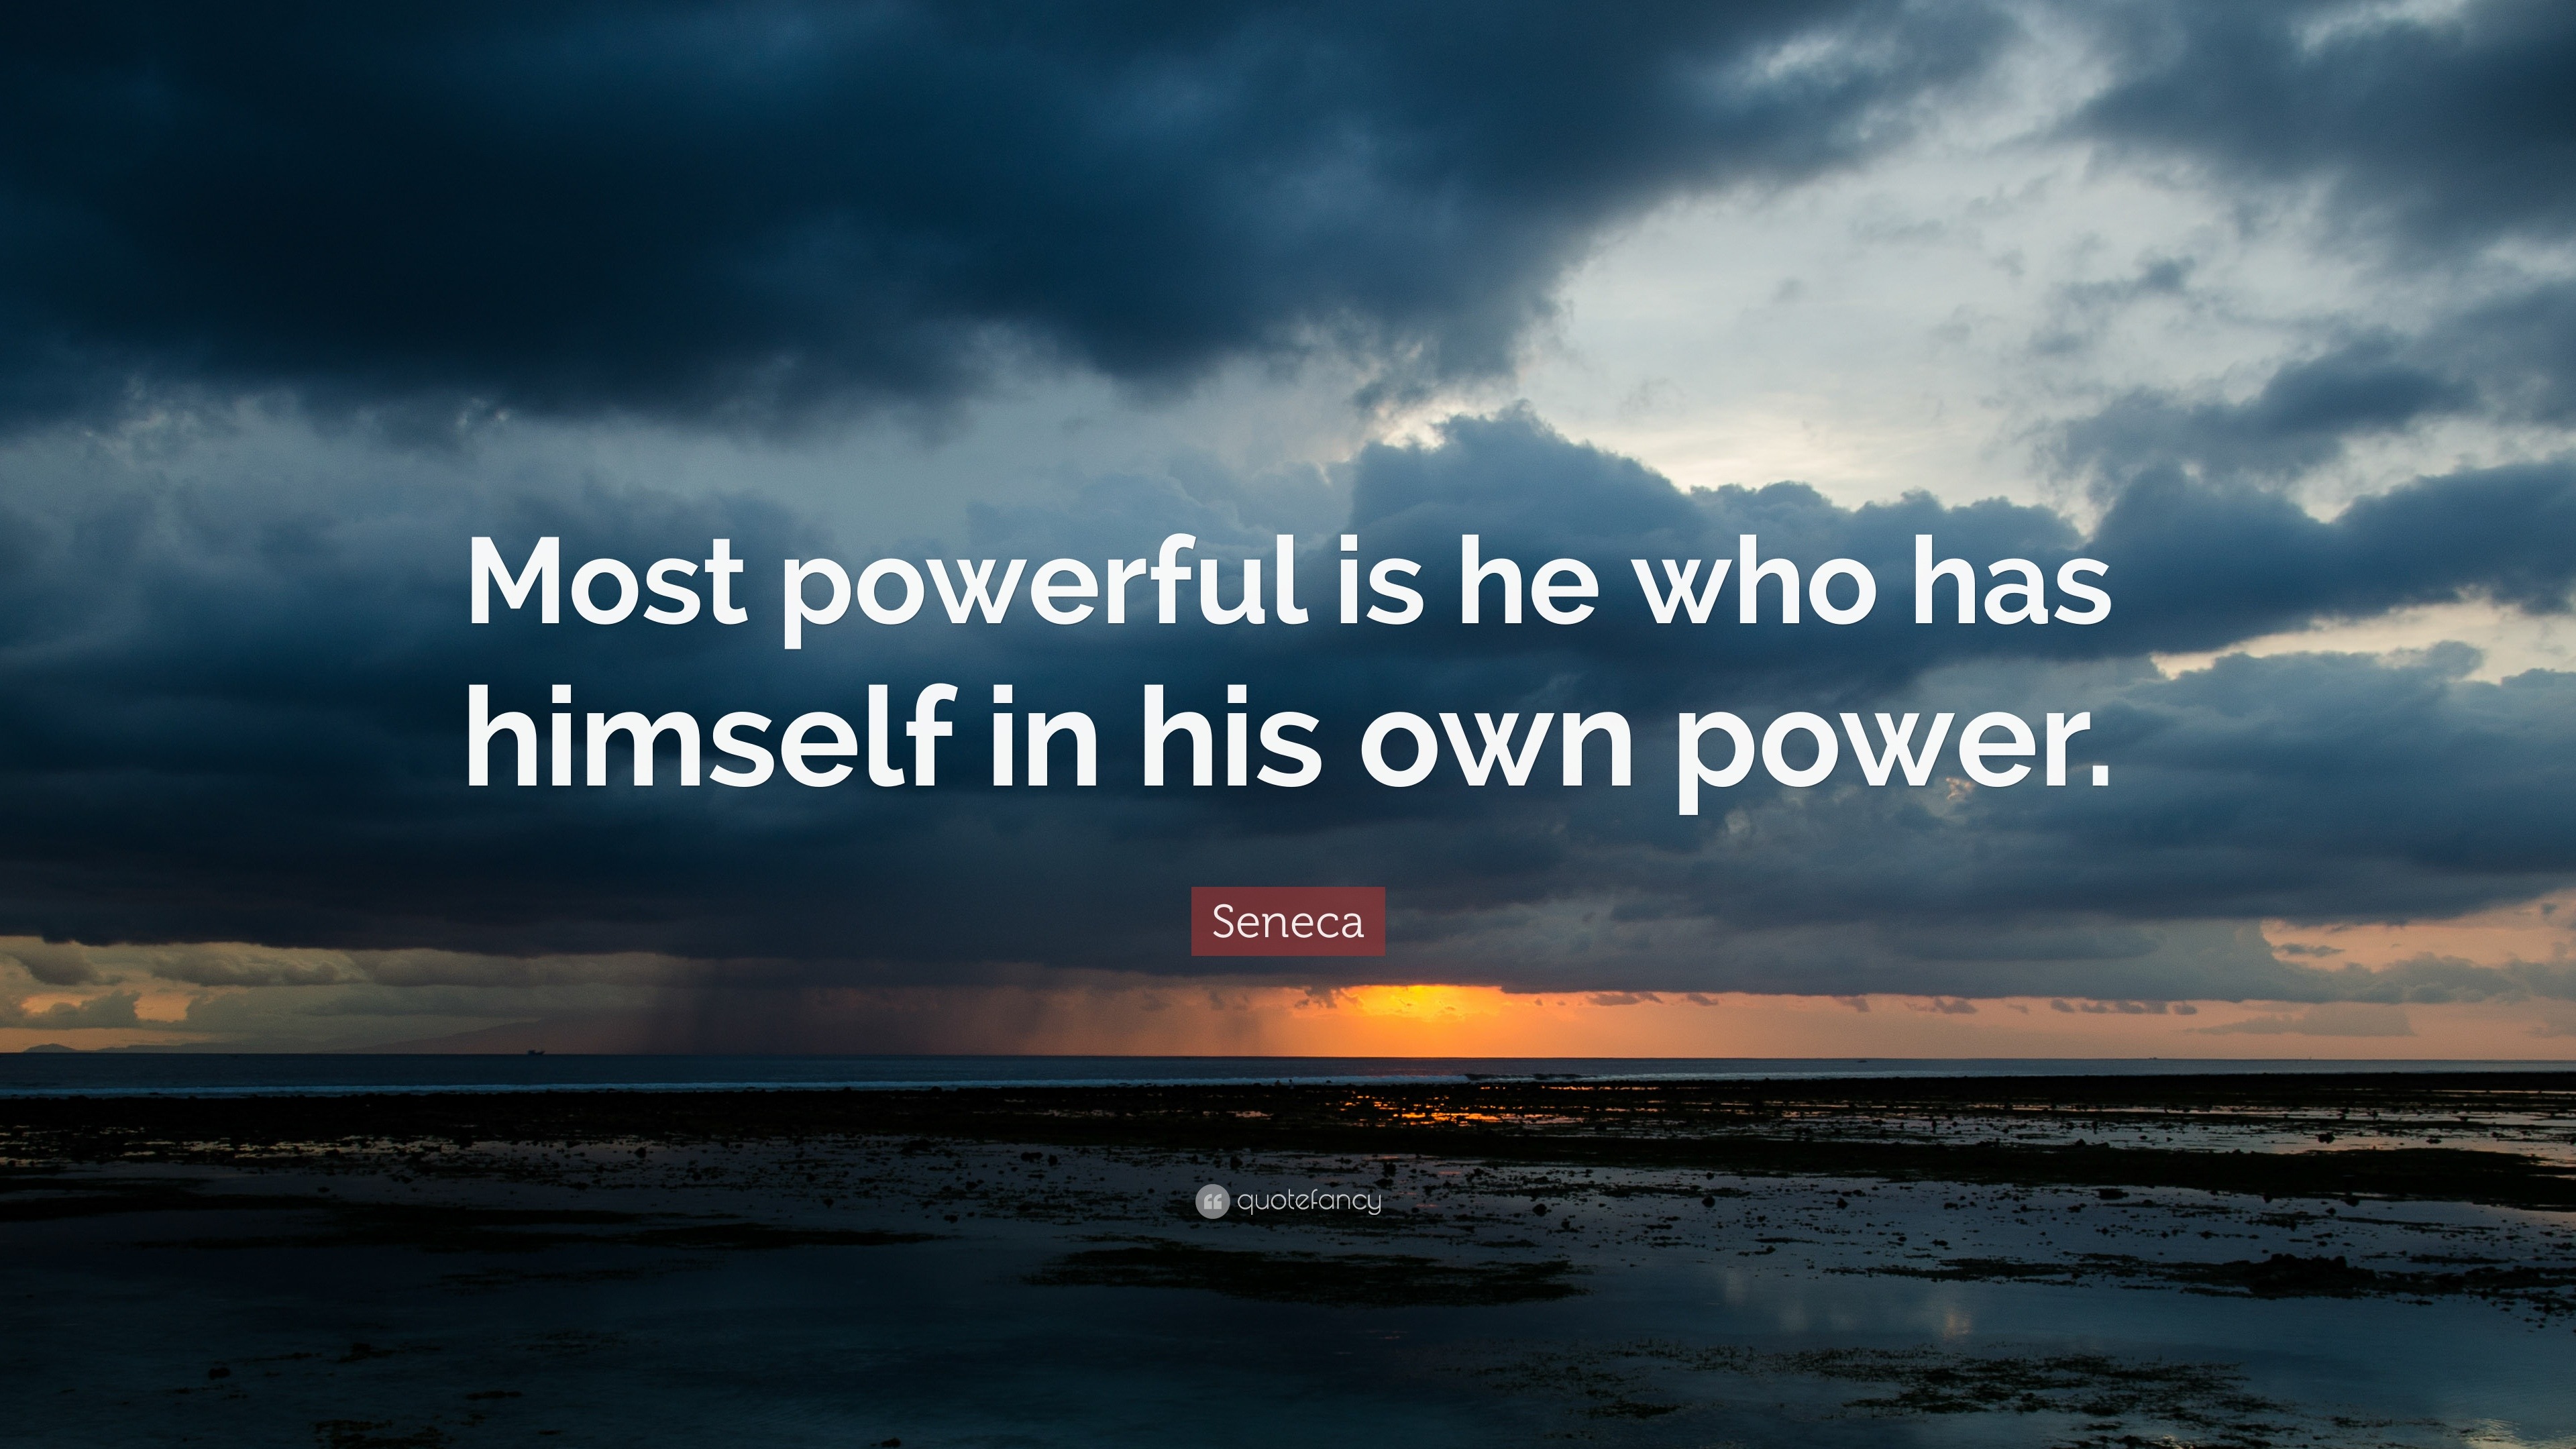 Seneca Quote: “Most powerful is he who has himself in his own power.”